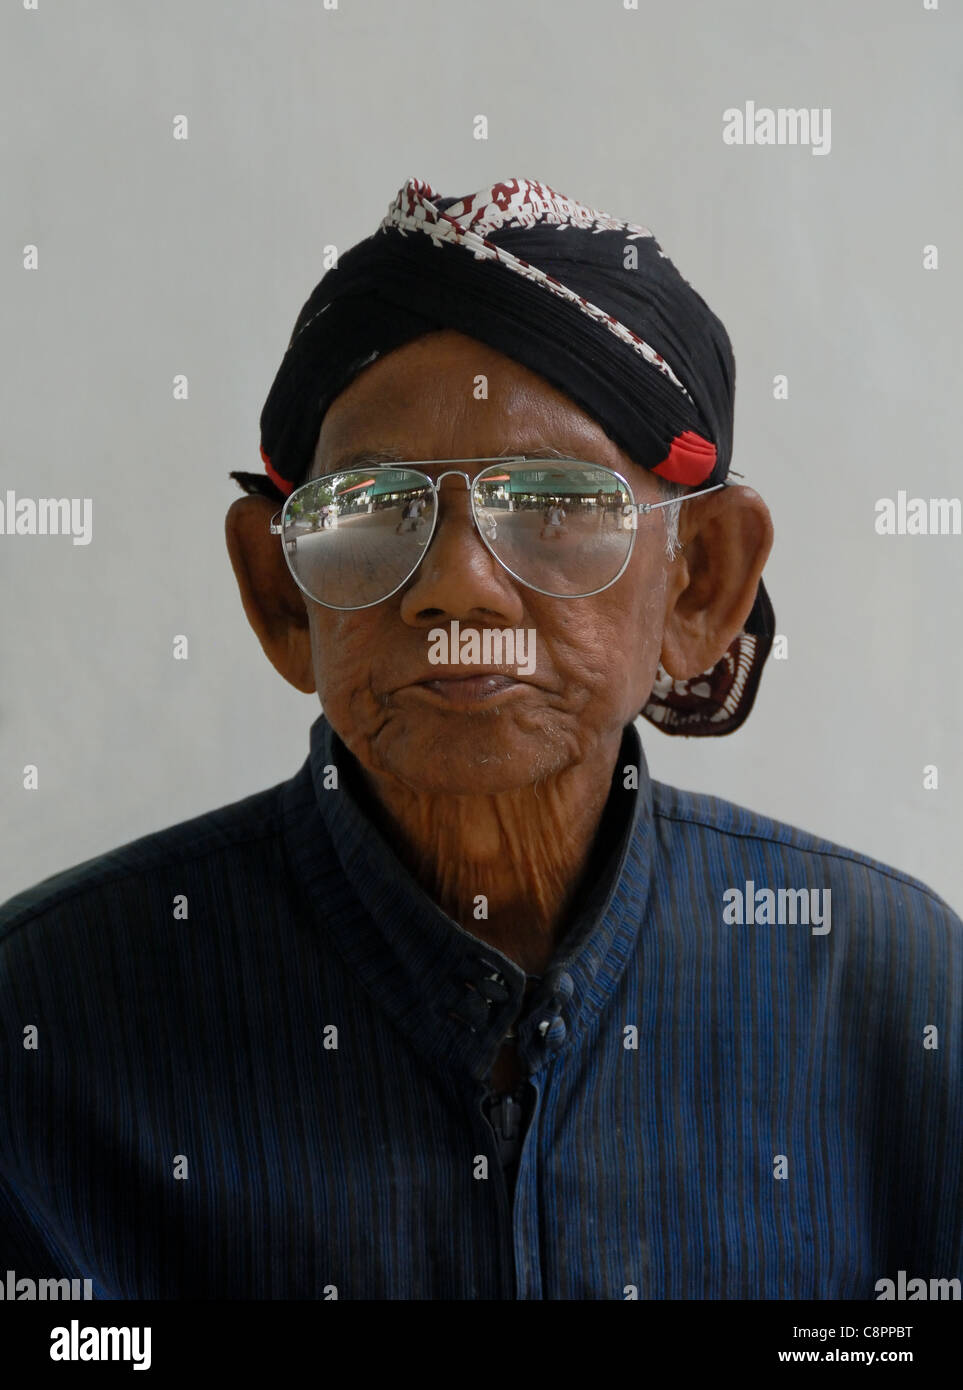 Portrait of one of the sultan of Yogjakarta's men. Sunglasses and against a gray background.  A distinguished old gentleman. Stock Photo